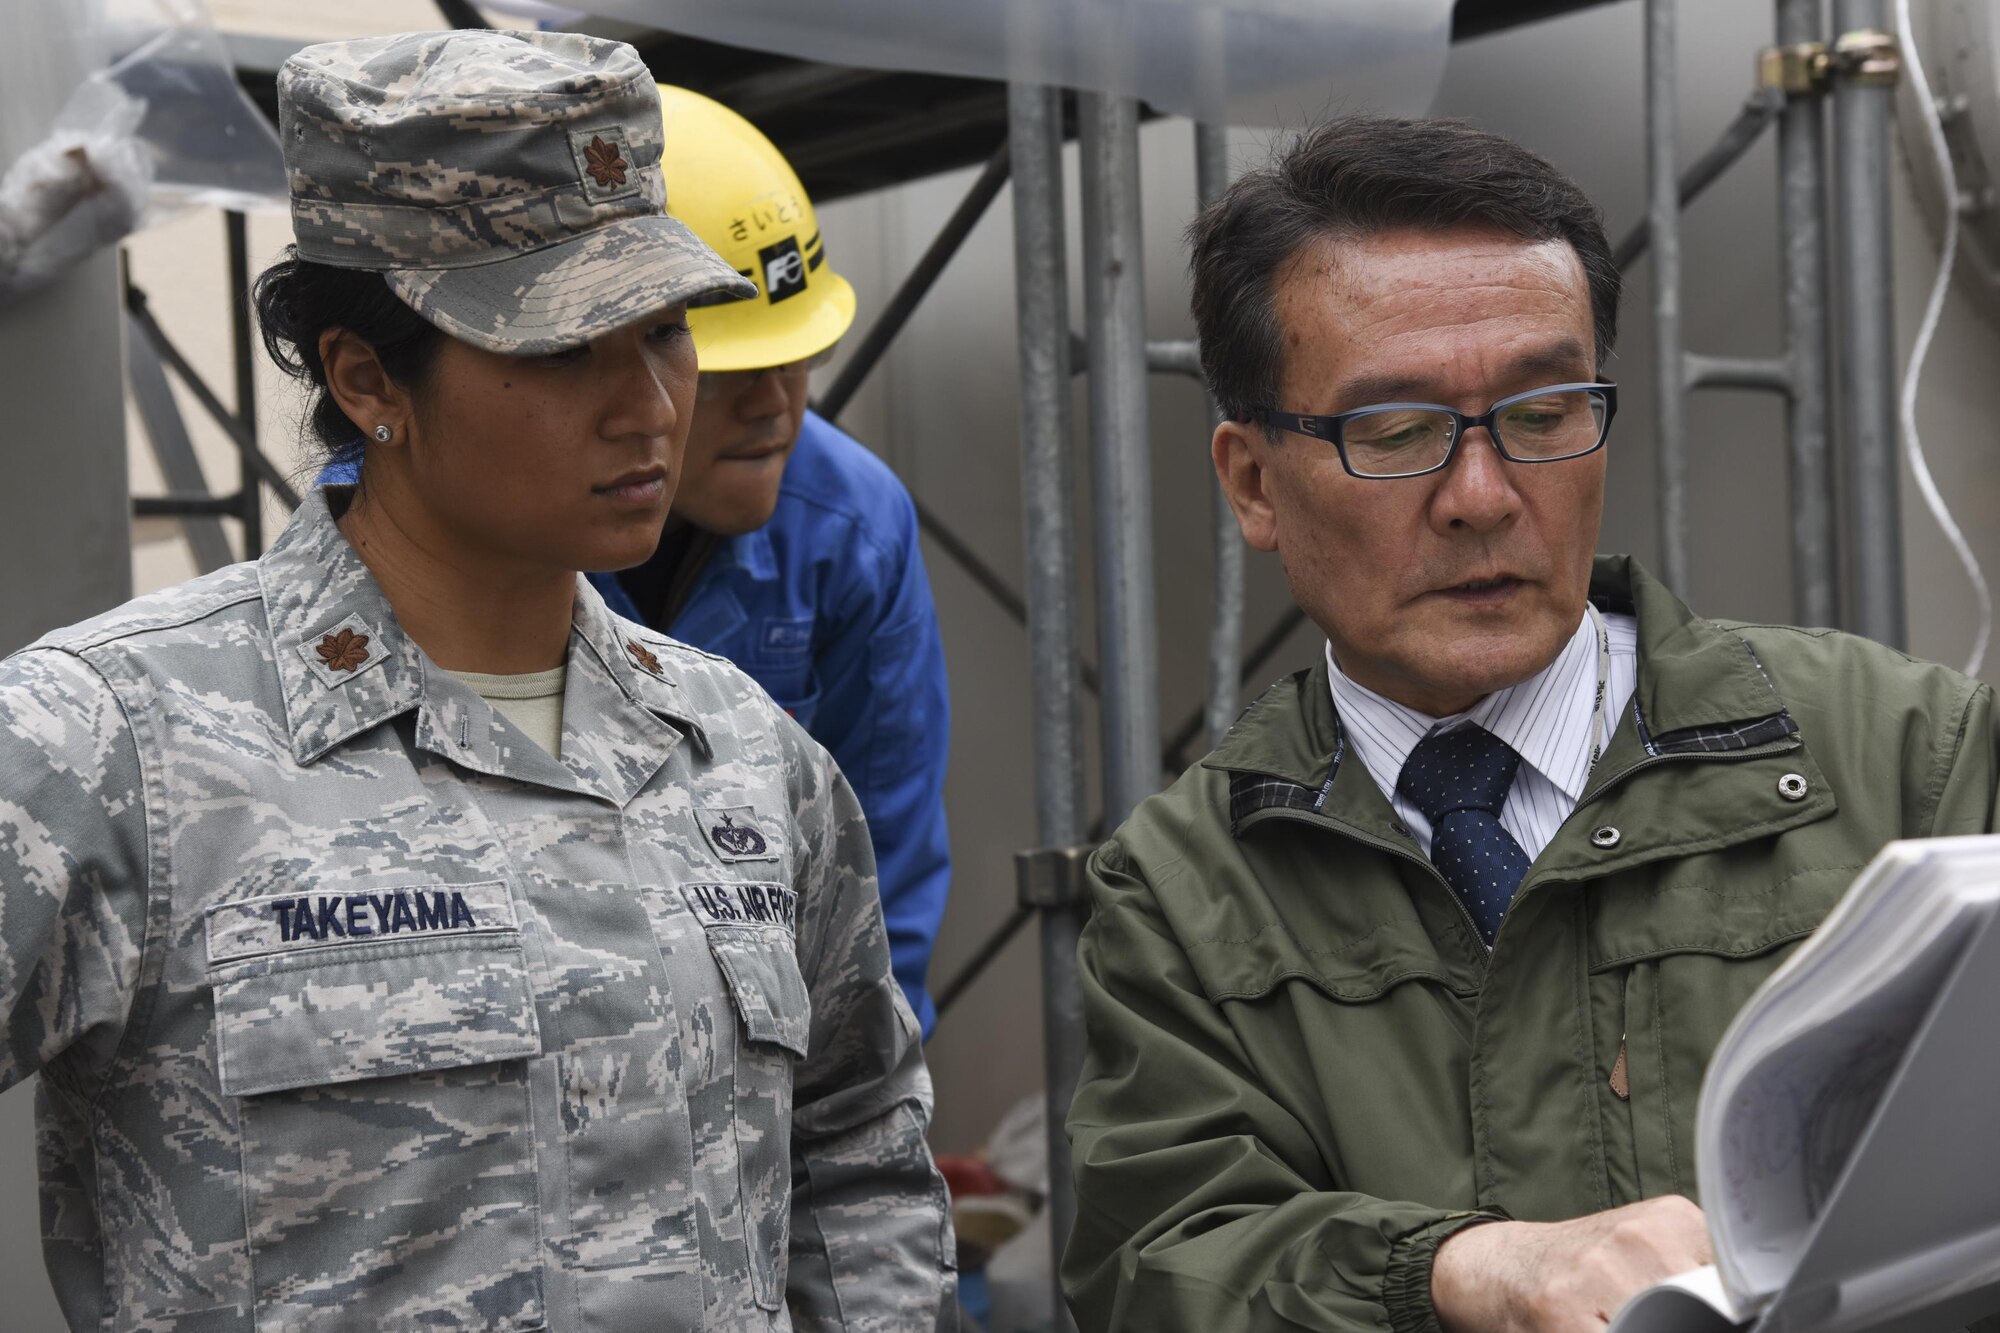 A contractor member from Sanwa Engineering Company, Limited explains the progress of the project to Major Korinne Takeyama, 374th Civil Engineer Squadron operations flight commander, at Yokota Air Base, Japan, April 8, 2017. The 374th Civil Engineer Squadron along with contractors repaired the gas leak from one of the gas-insulated high-voltage switchgear in the West Substation to prevent further damage. (U.S. Air Force photo by Machiko Arita)